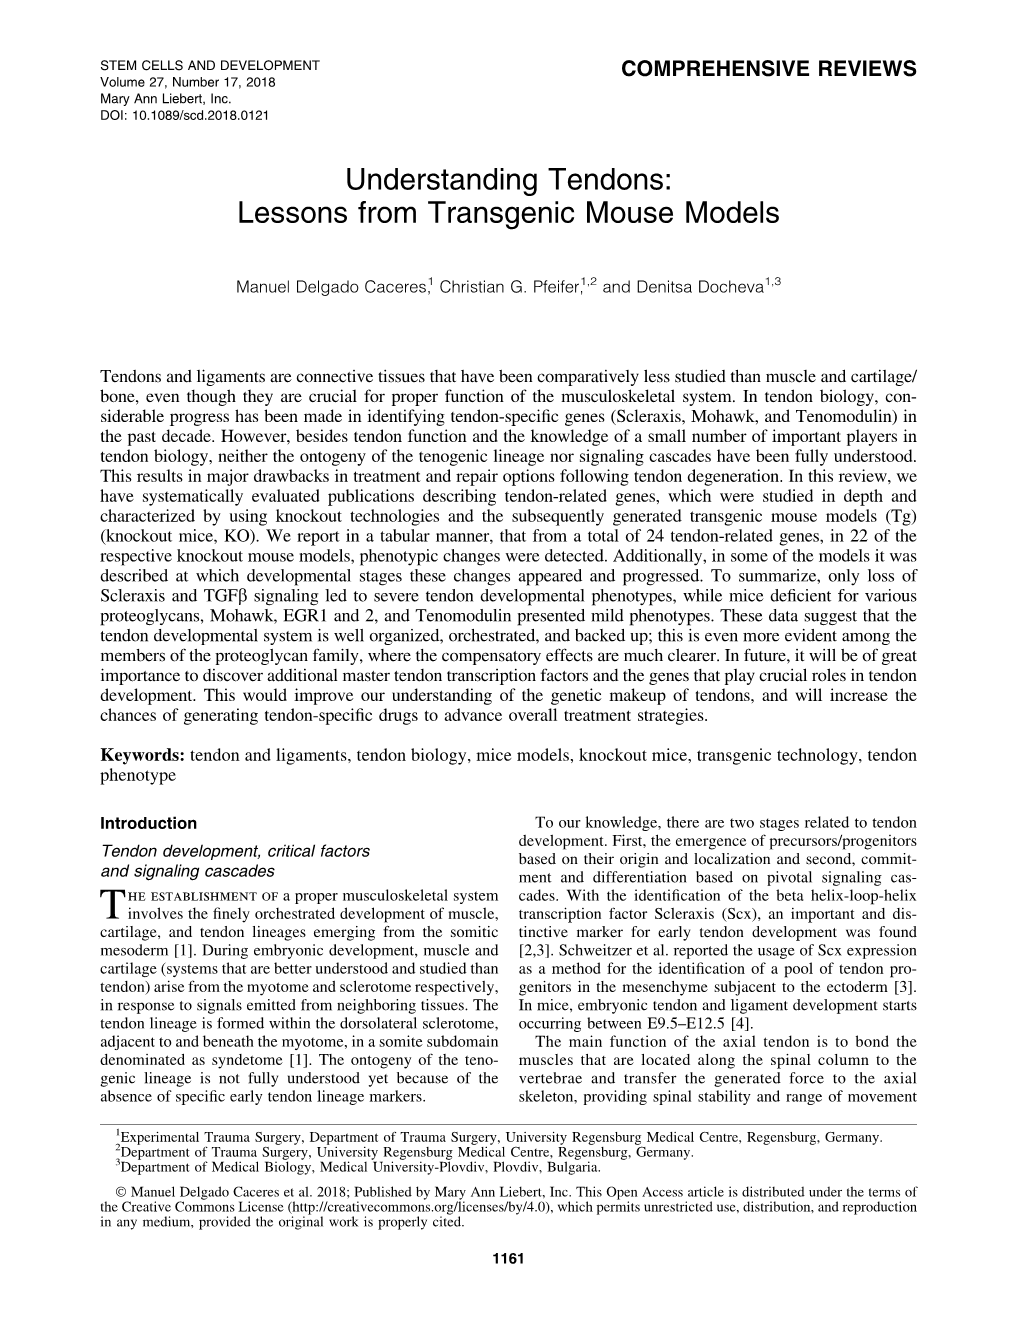 Understanding Tendons: Lessons from Transgenic Mouse Models